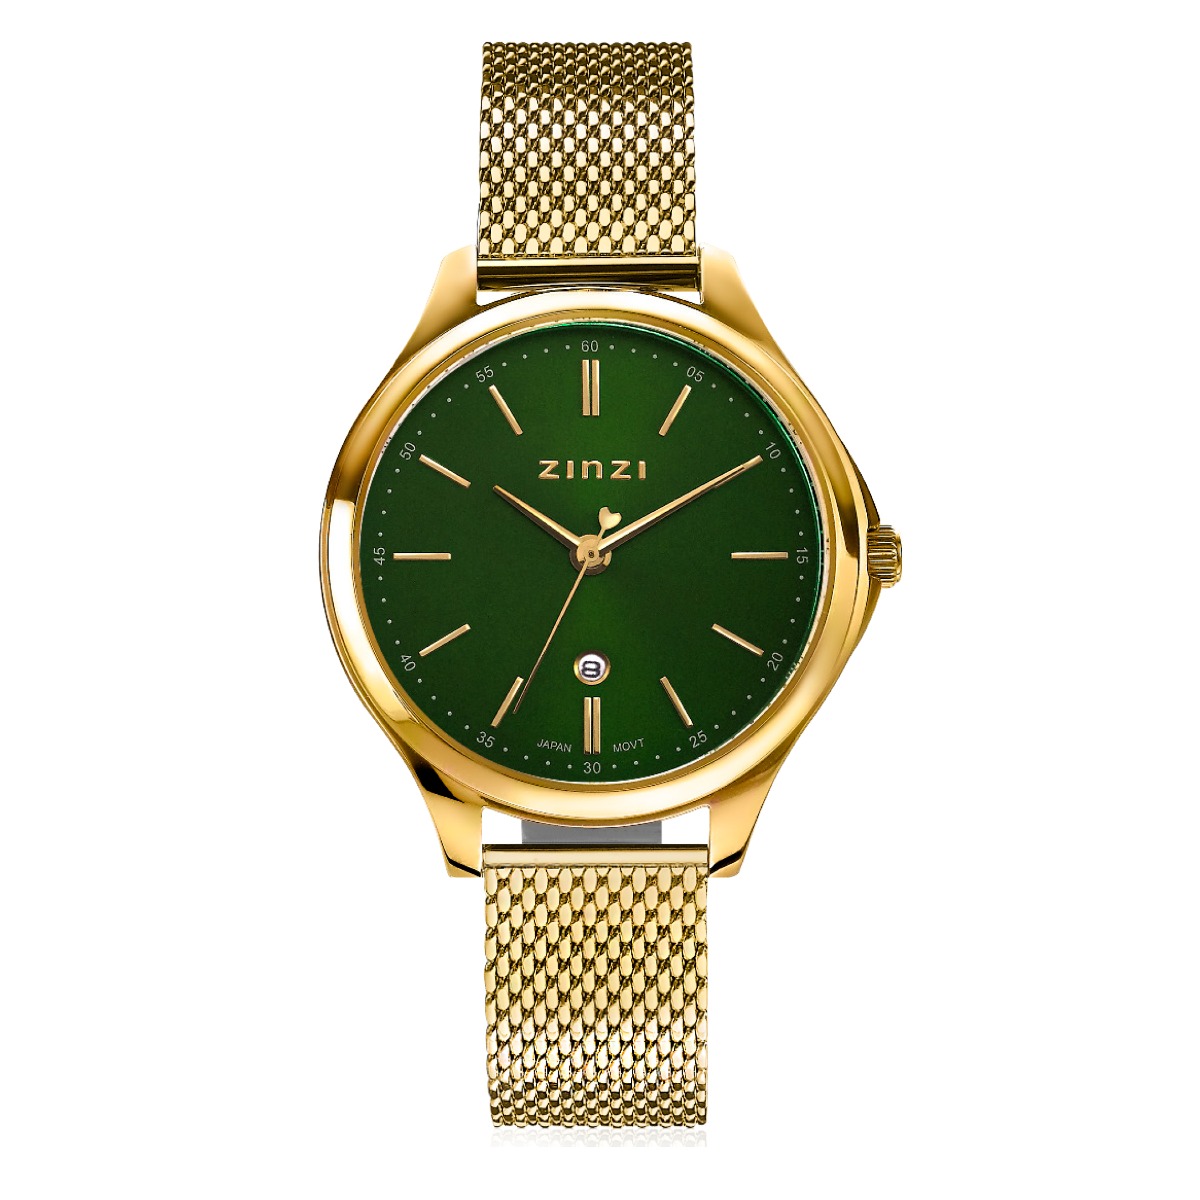 ZINZI Classy Watch 34mm Green Dial Gold Colored Stainless Steel Case and Mesh Strap with Date ZIW1035M